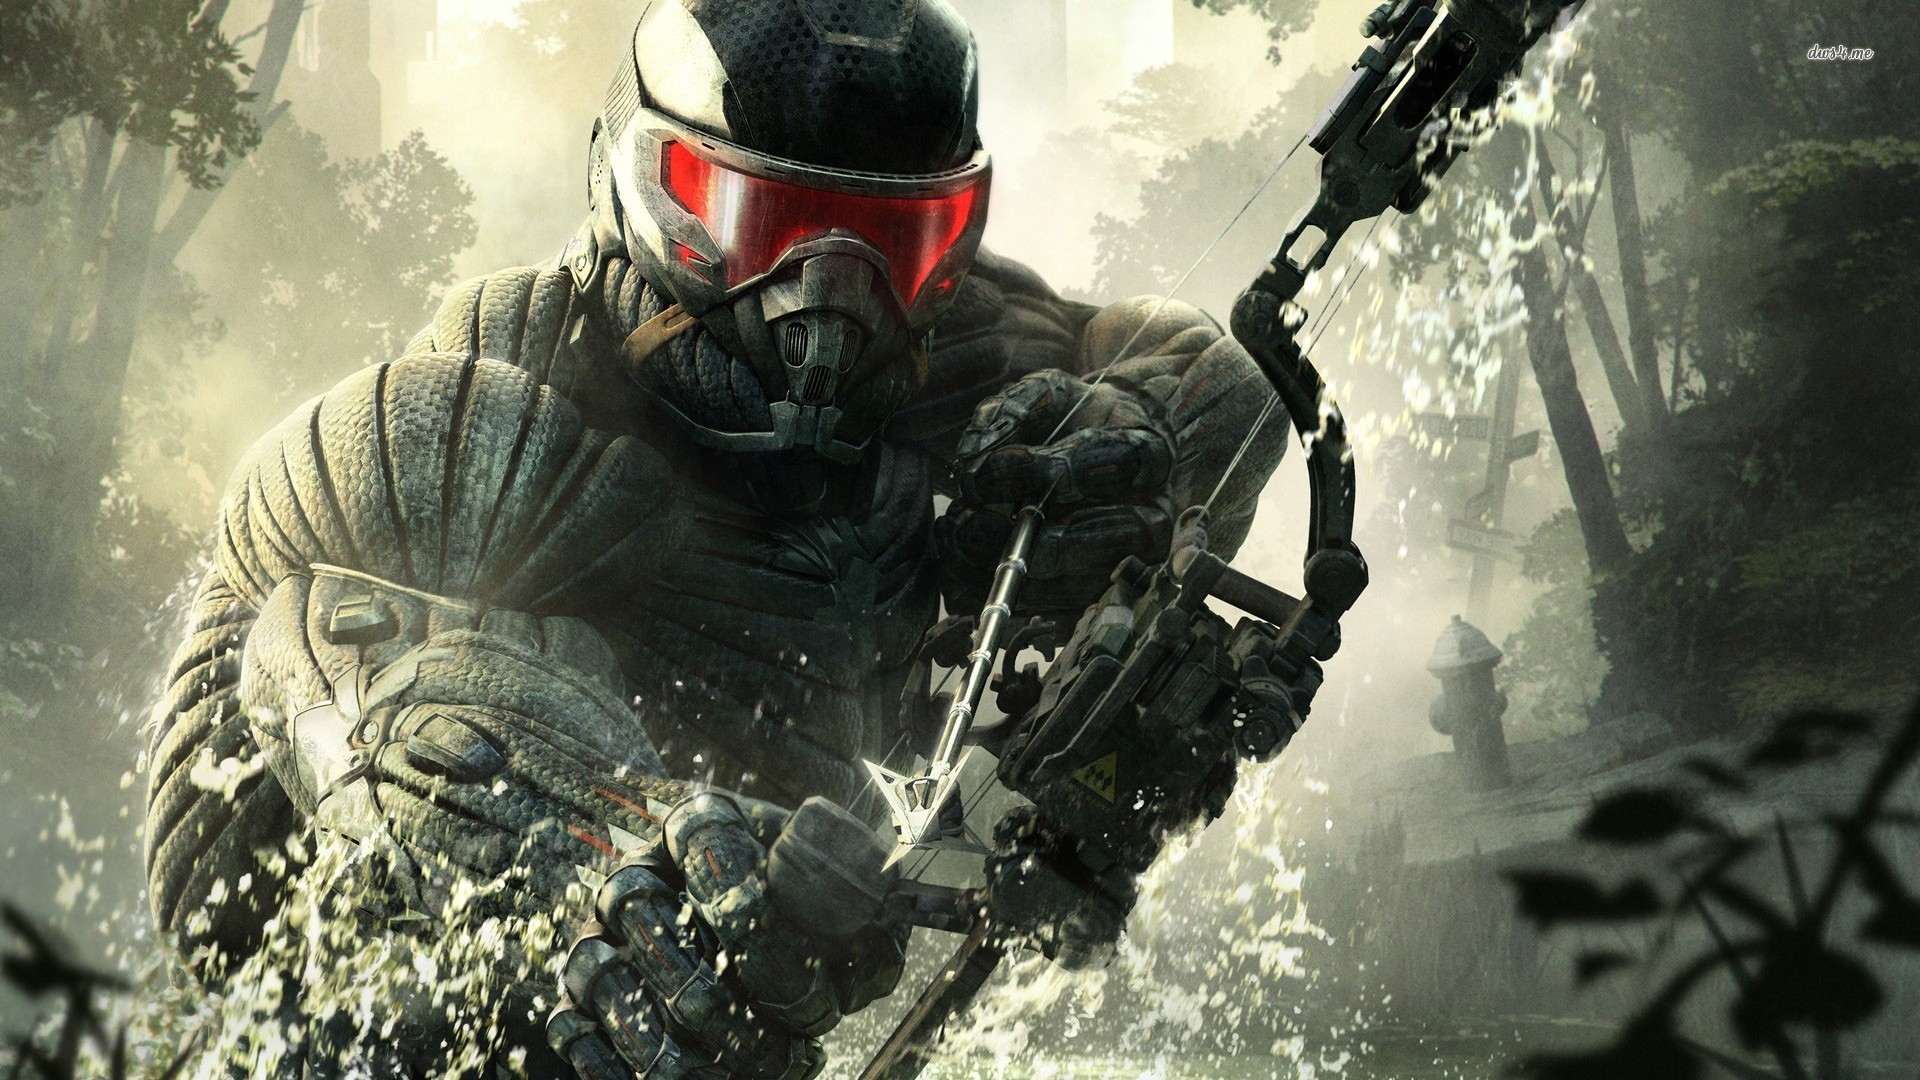 1920x1080 Crysis 2 Wallpapers in HD ...